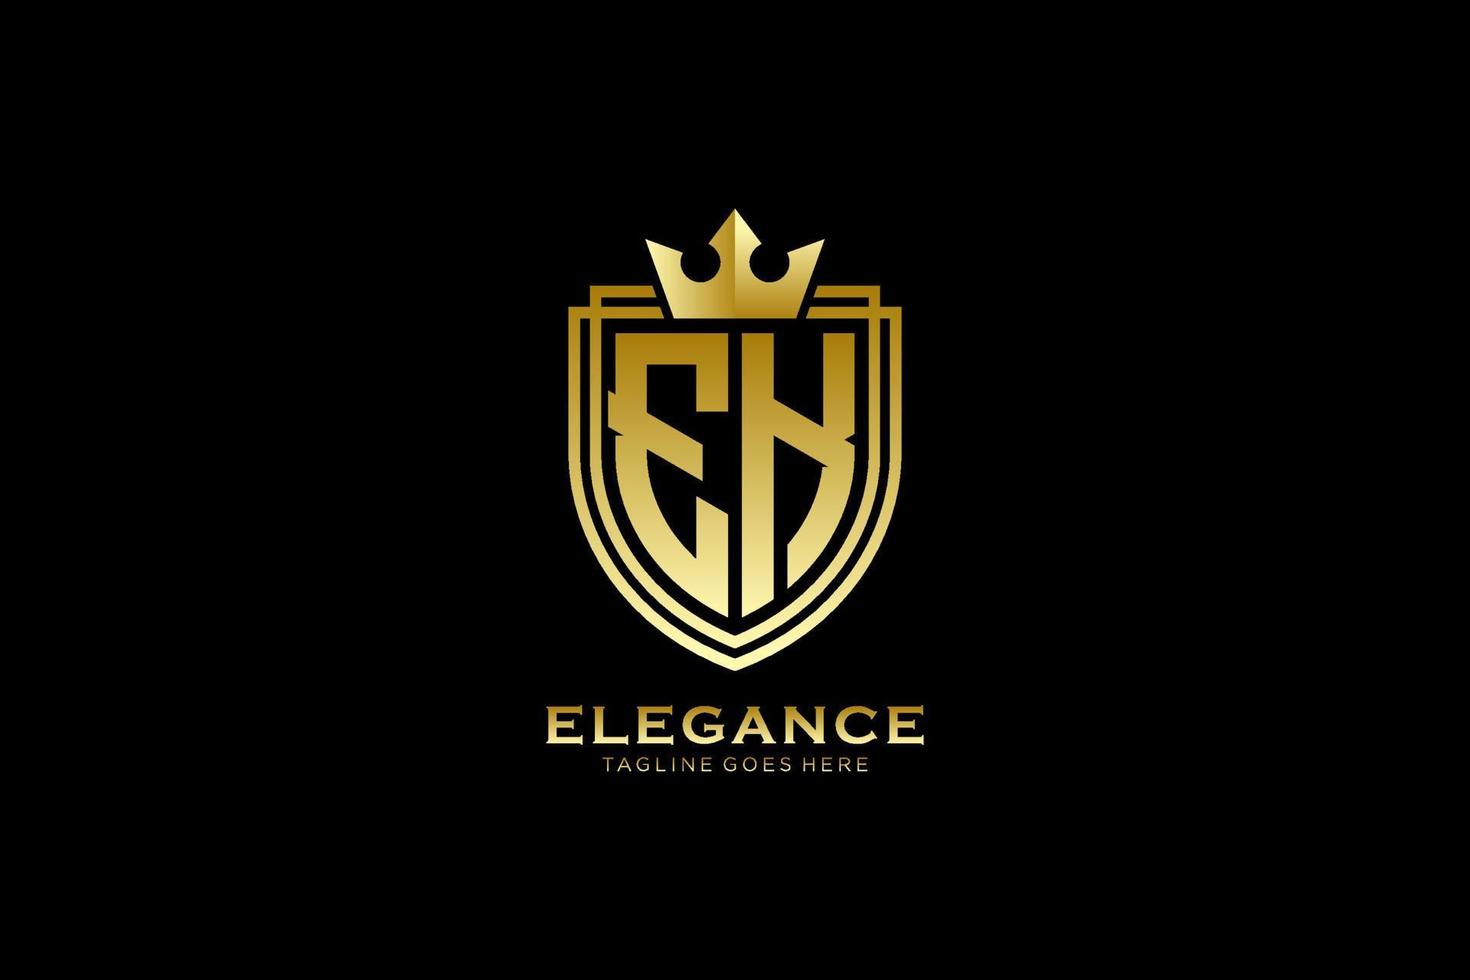 initial EK elegant luxury monogram logo or badge template with scrolls and royal crown - perfect for luxurious branding projects vector